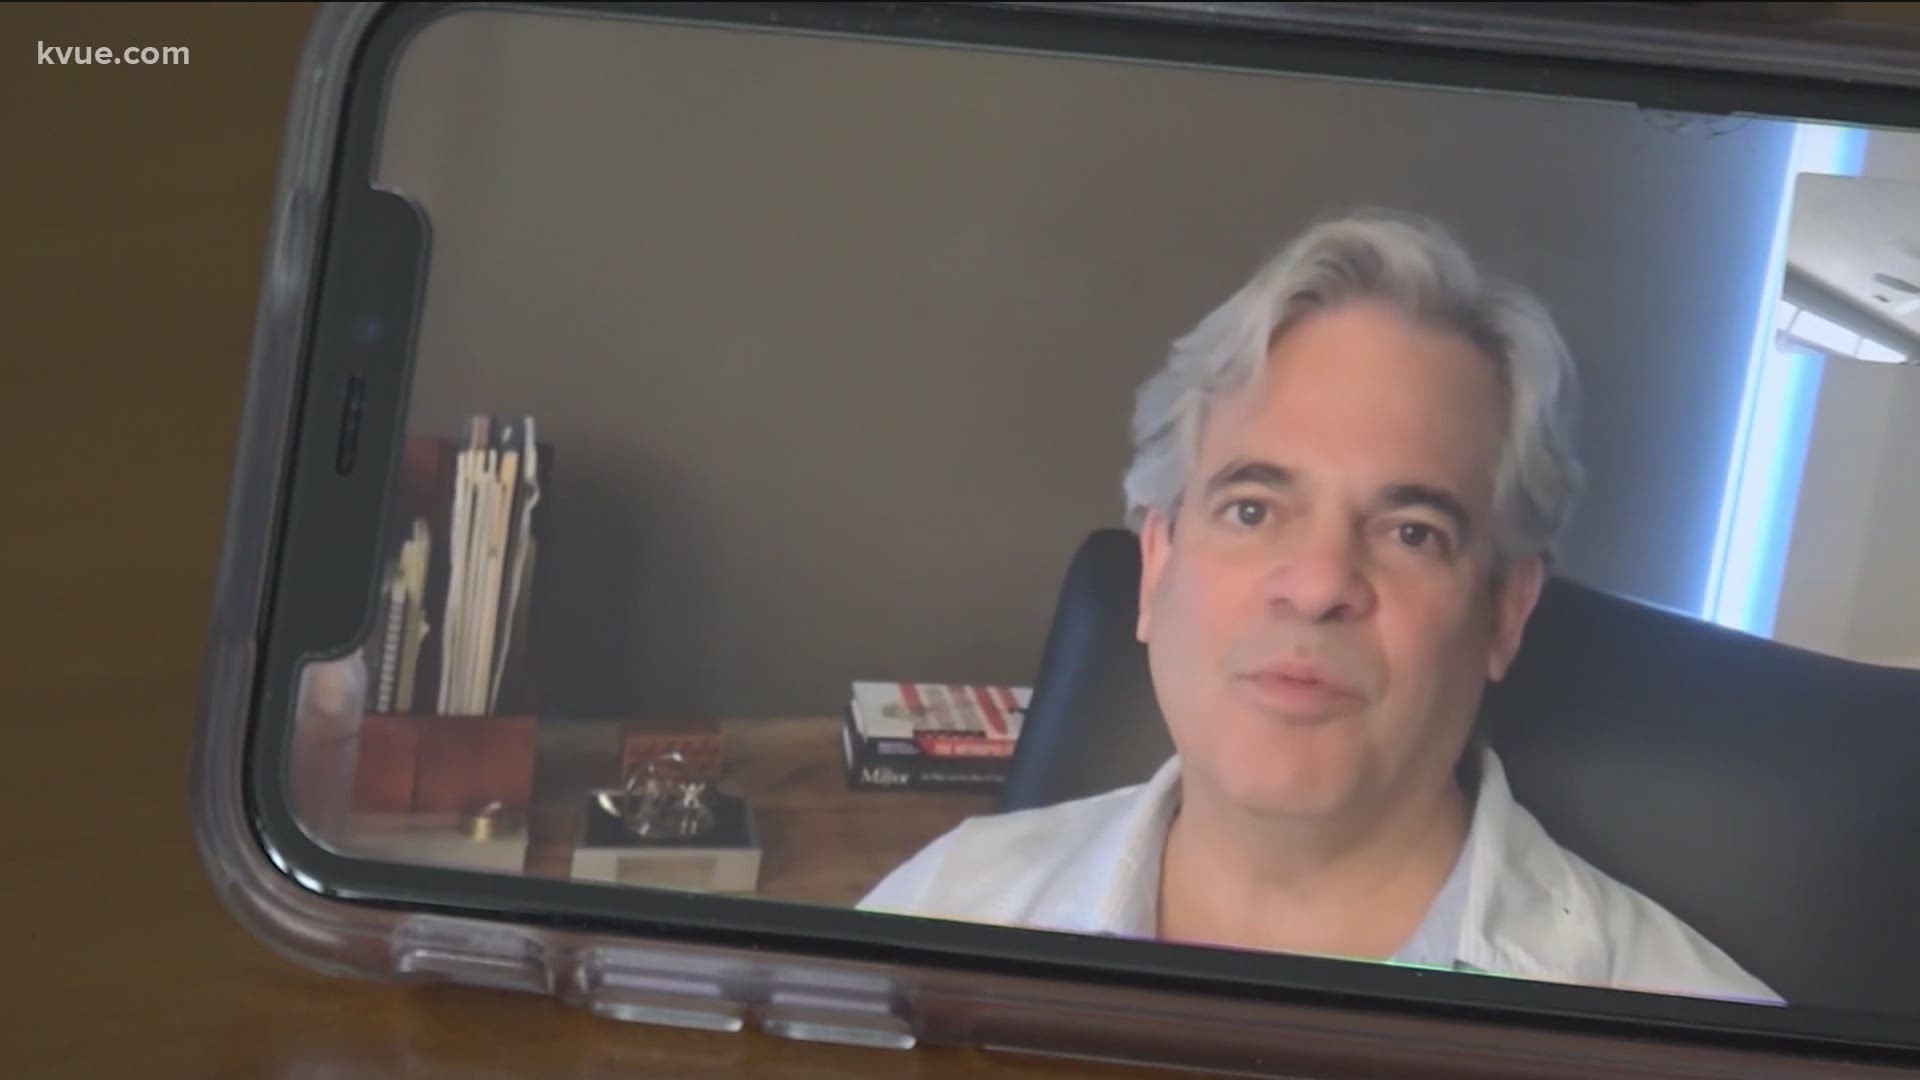 Heading into this holiday weekend, Mayor Steve Adler said he's looking at daunting numbers based on the current trajectory of coronavirus cases.